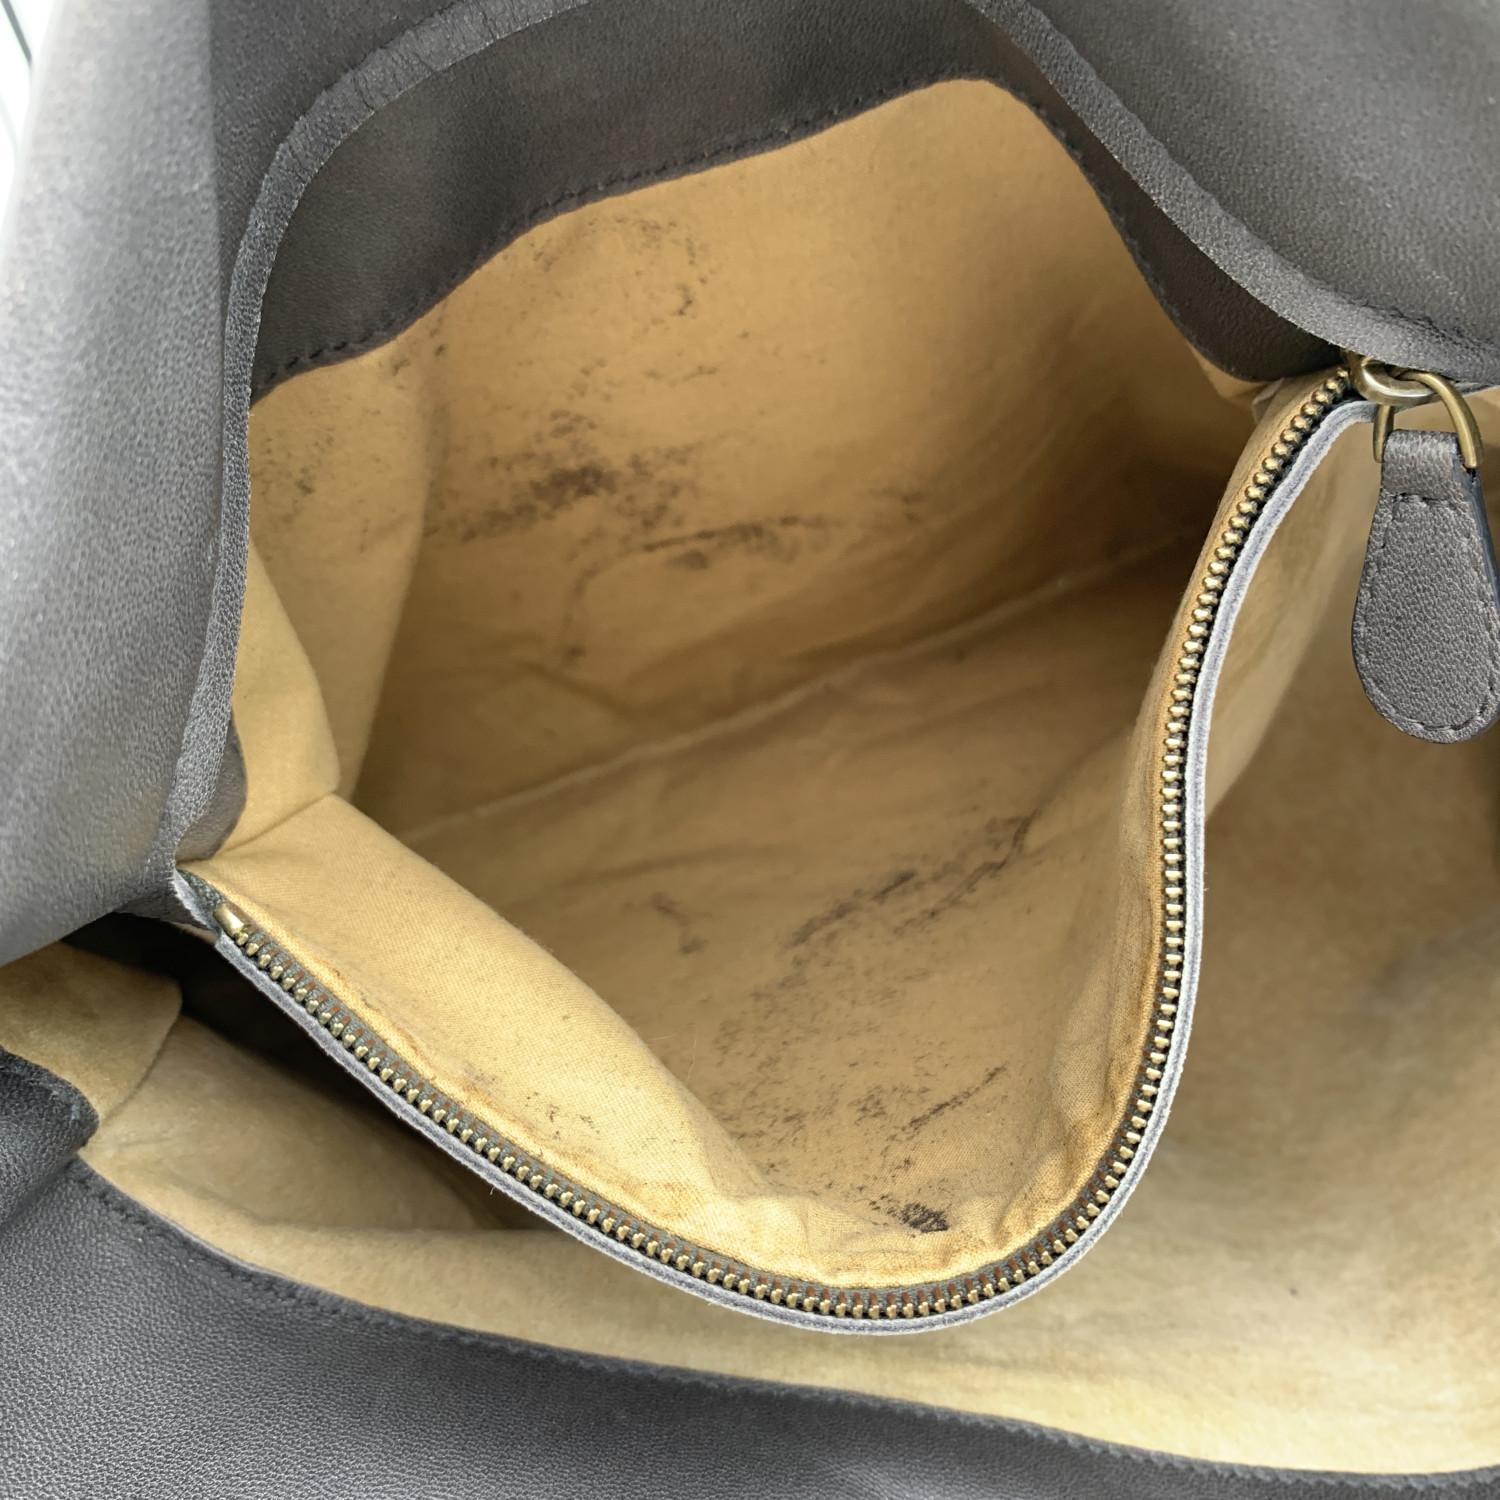 BOTTEGA VENETA Intrecciato woven 'Roma' leather tote bag in grey color, with gold metal hardware. Fold over strap with key closure. 3 main compartments. Beige suede lining with 1 side zip pocket and 1 side open pocket inside. 'BOTTEGA VENETA'